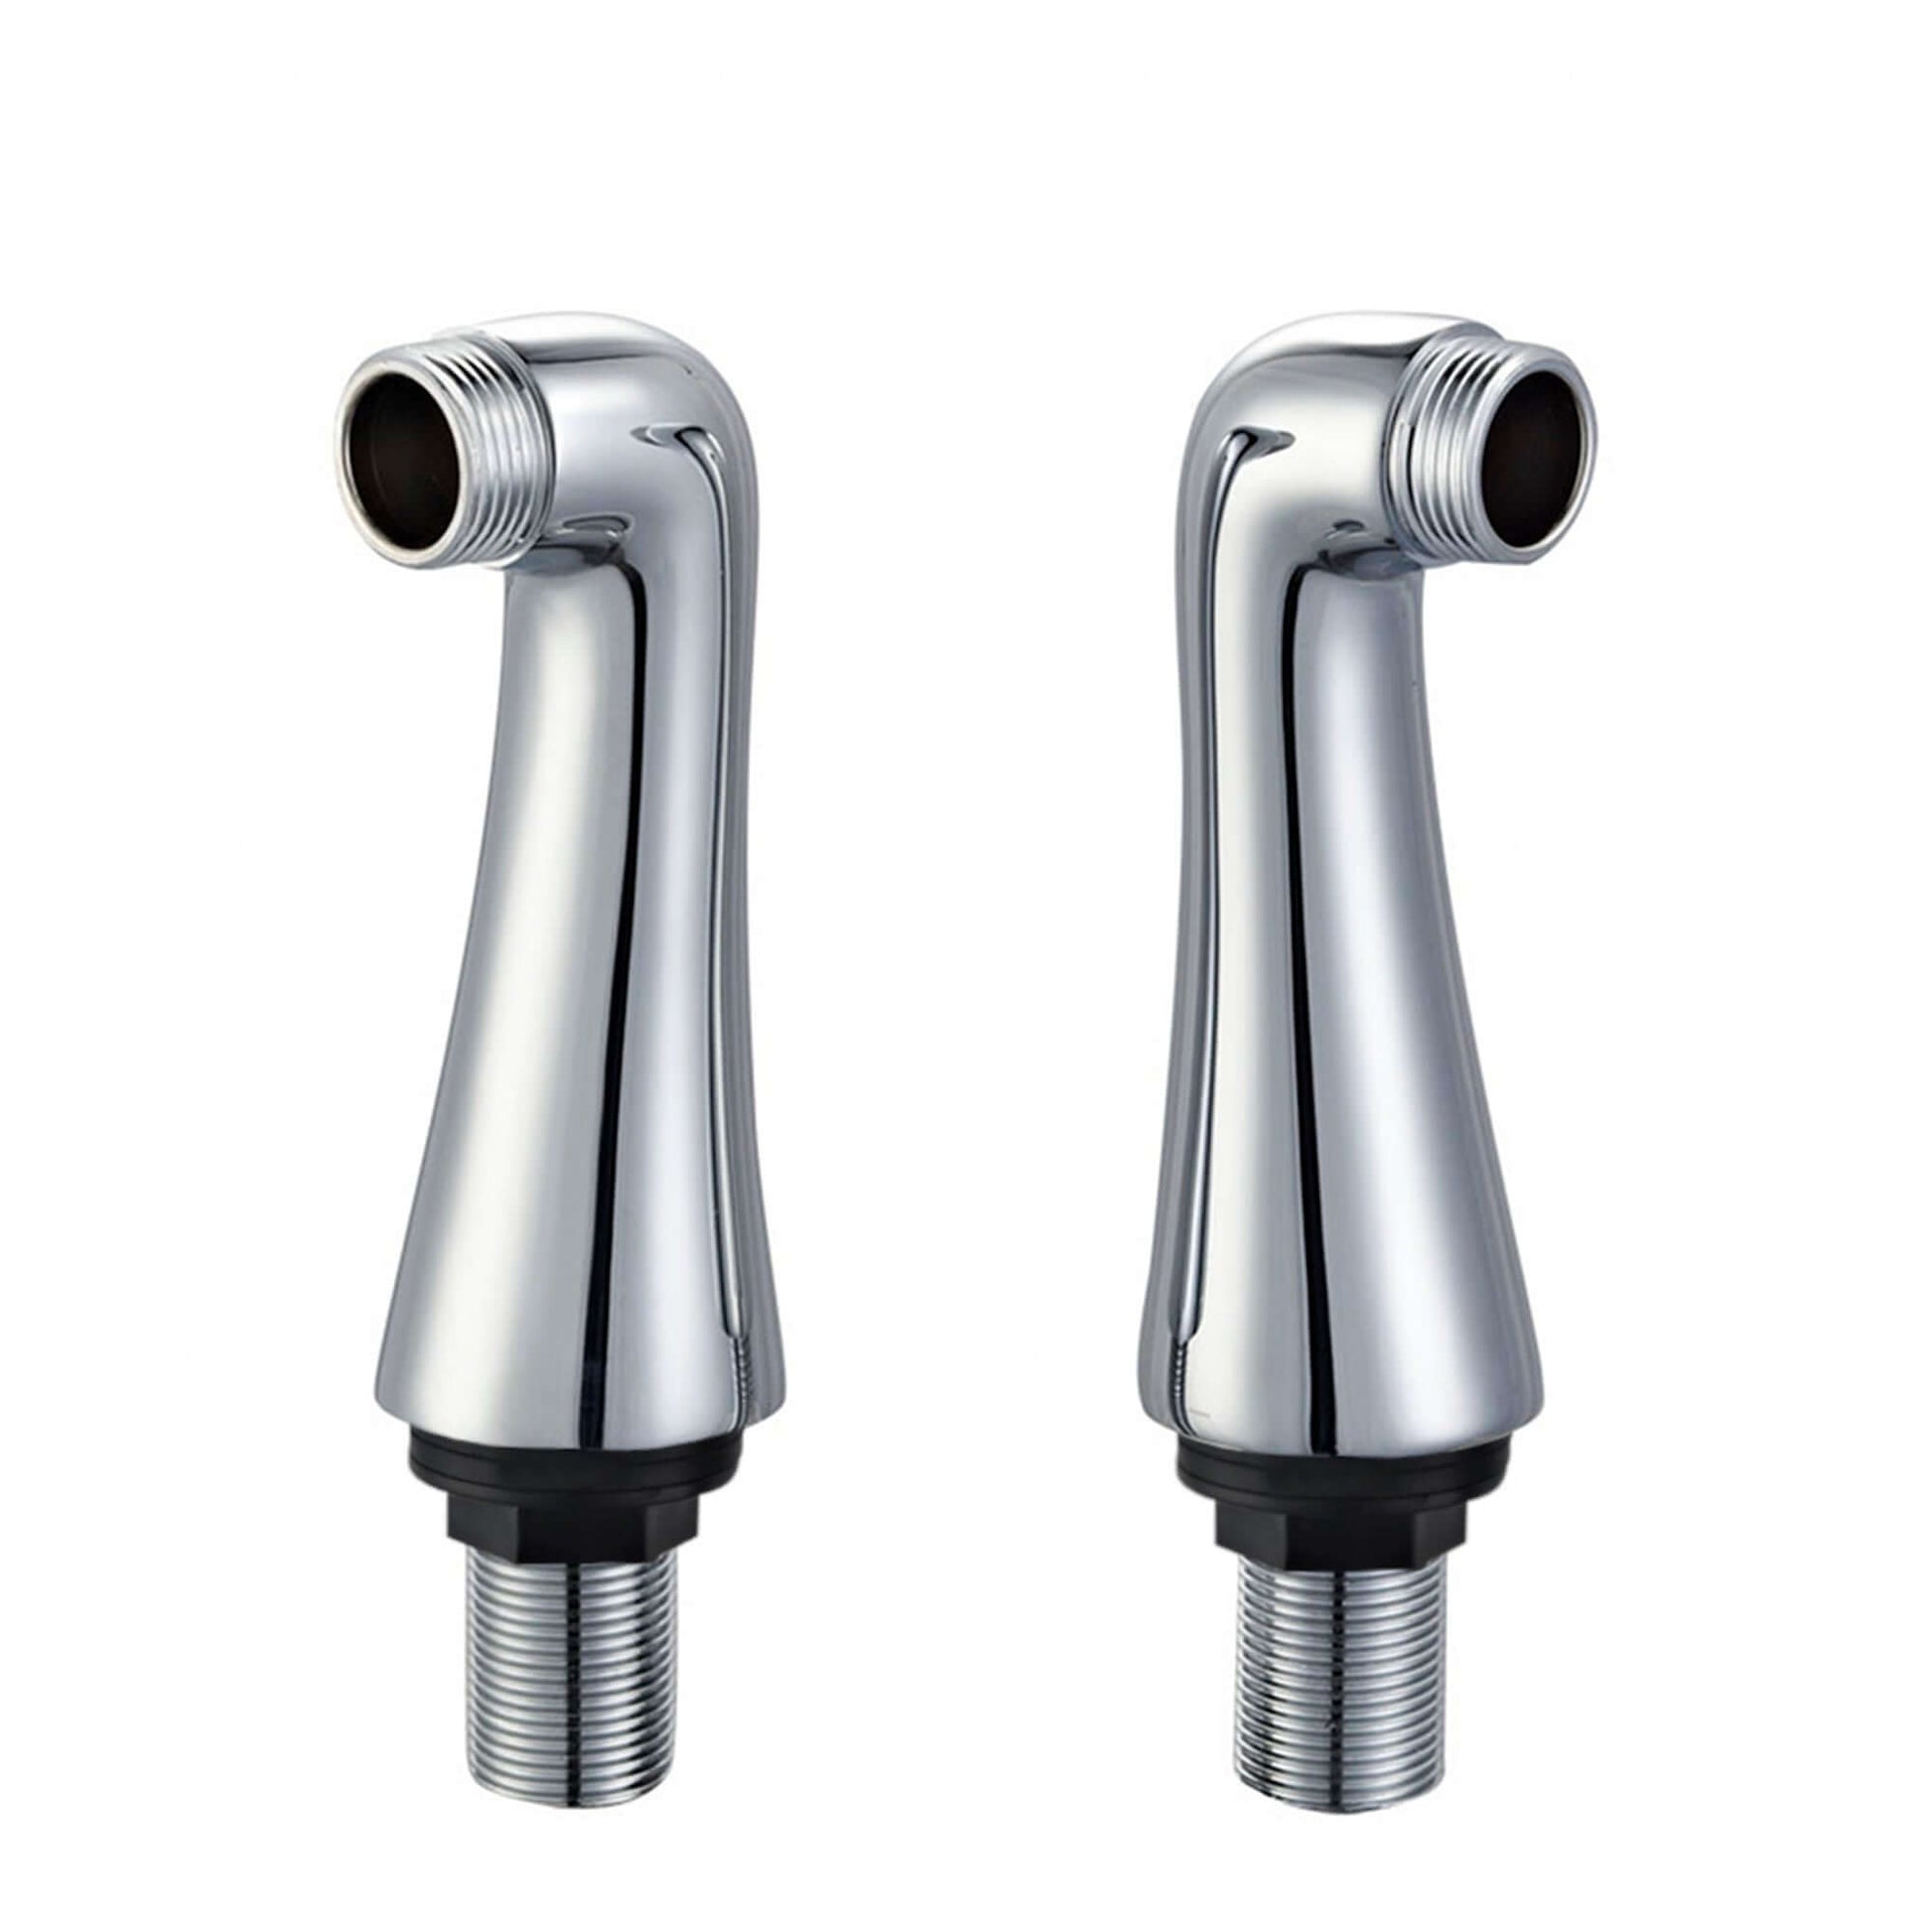 Pair of traditional bath tap legs for deck mounting - chrome - Taps